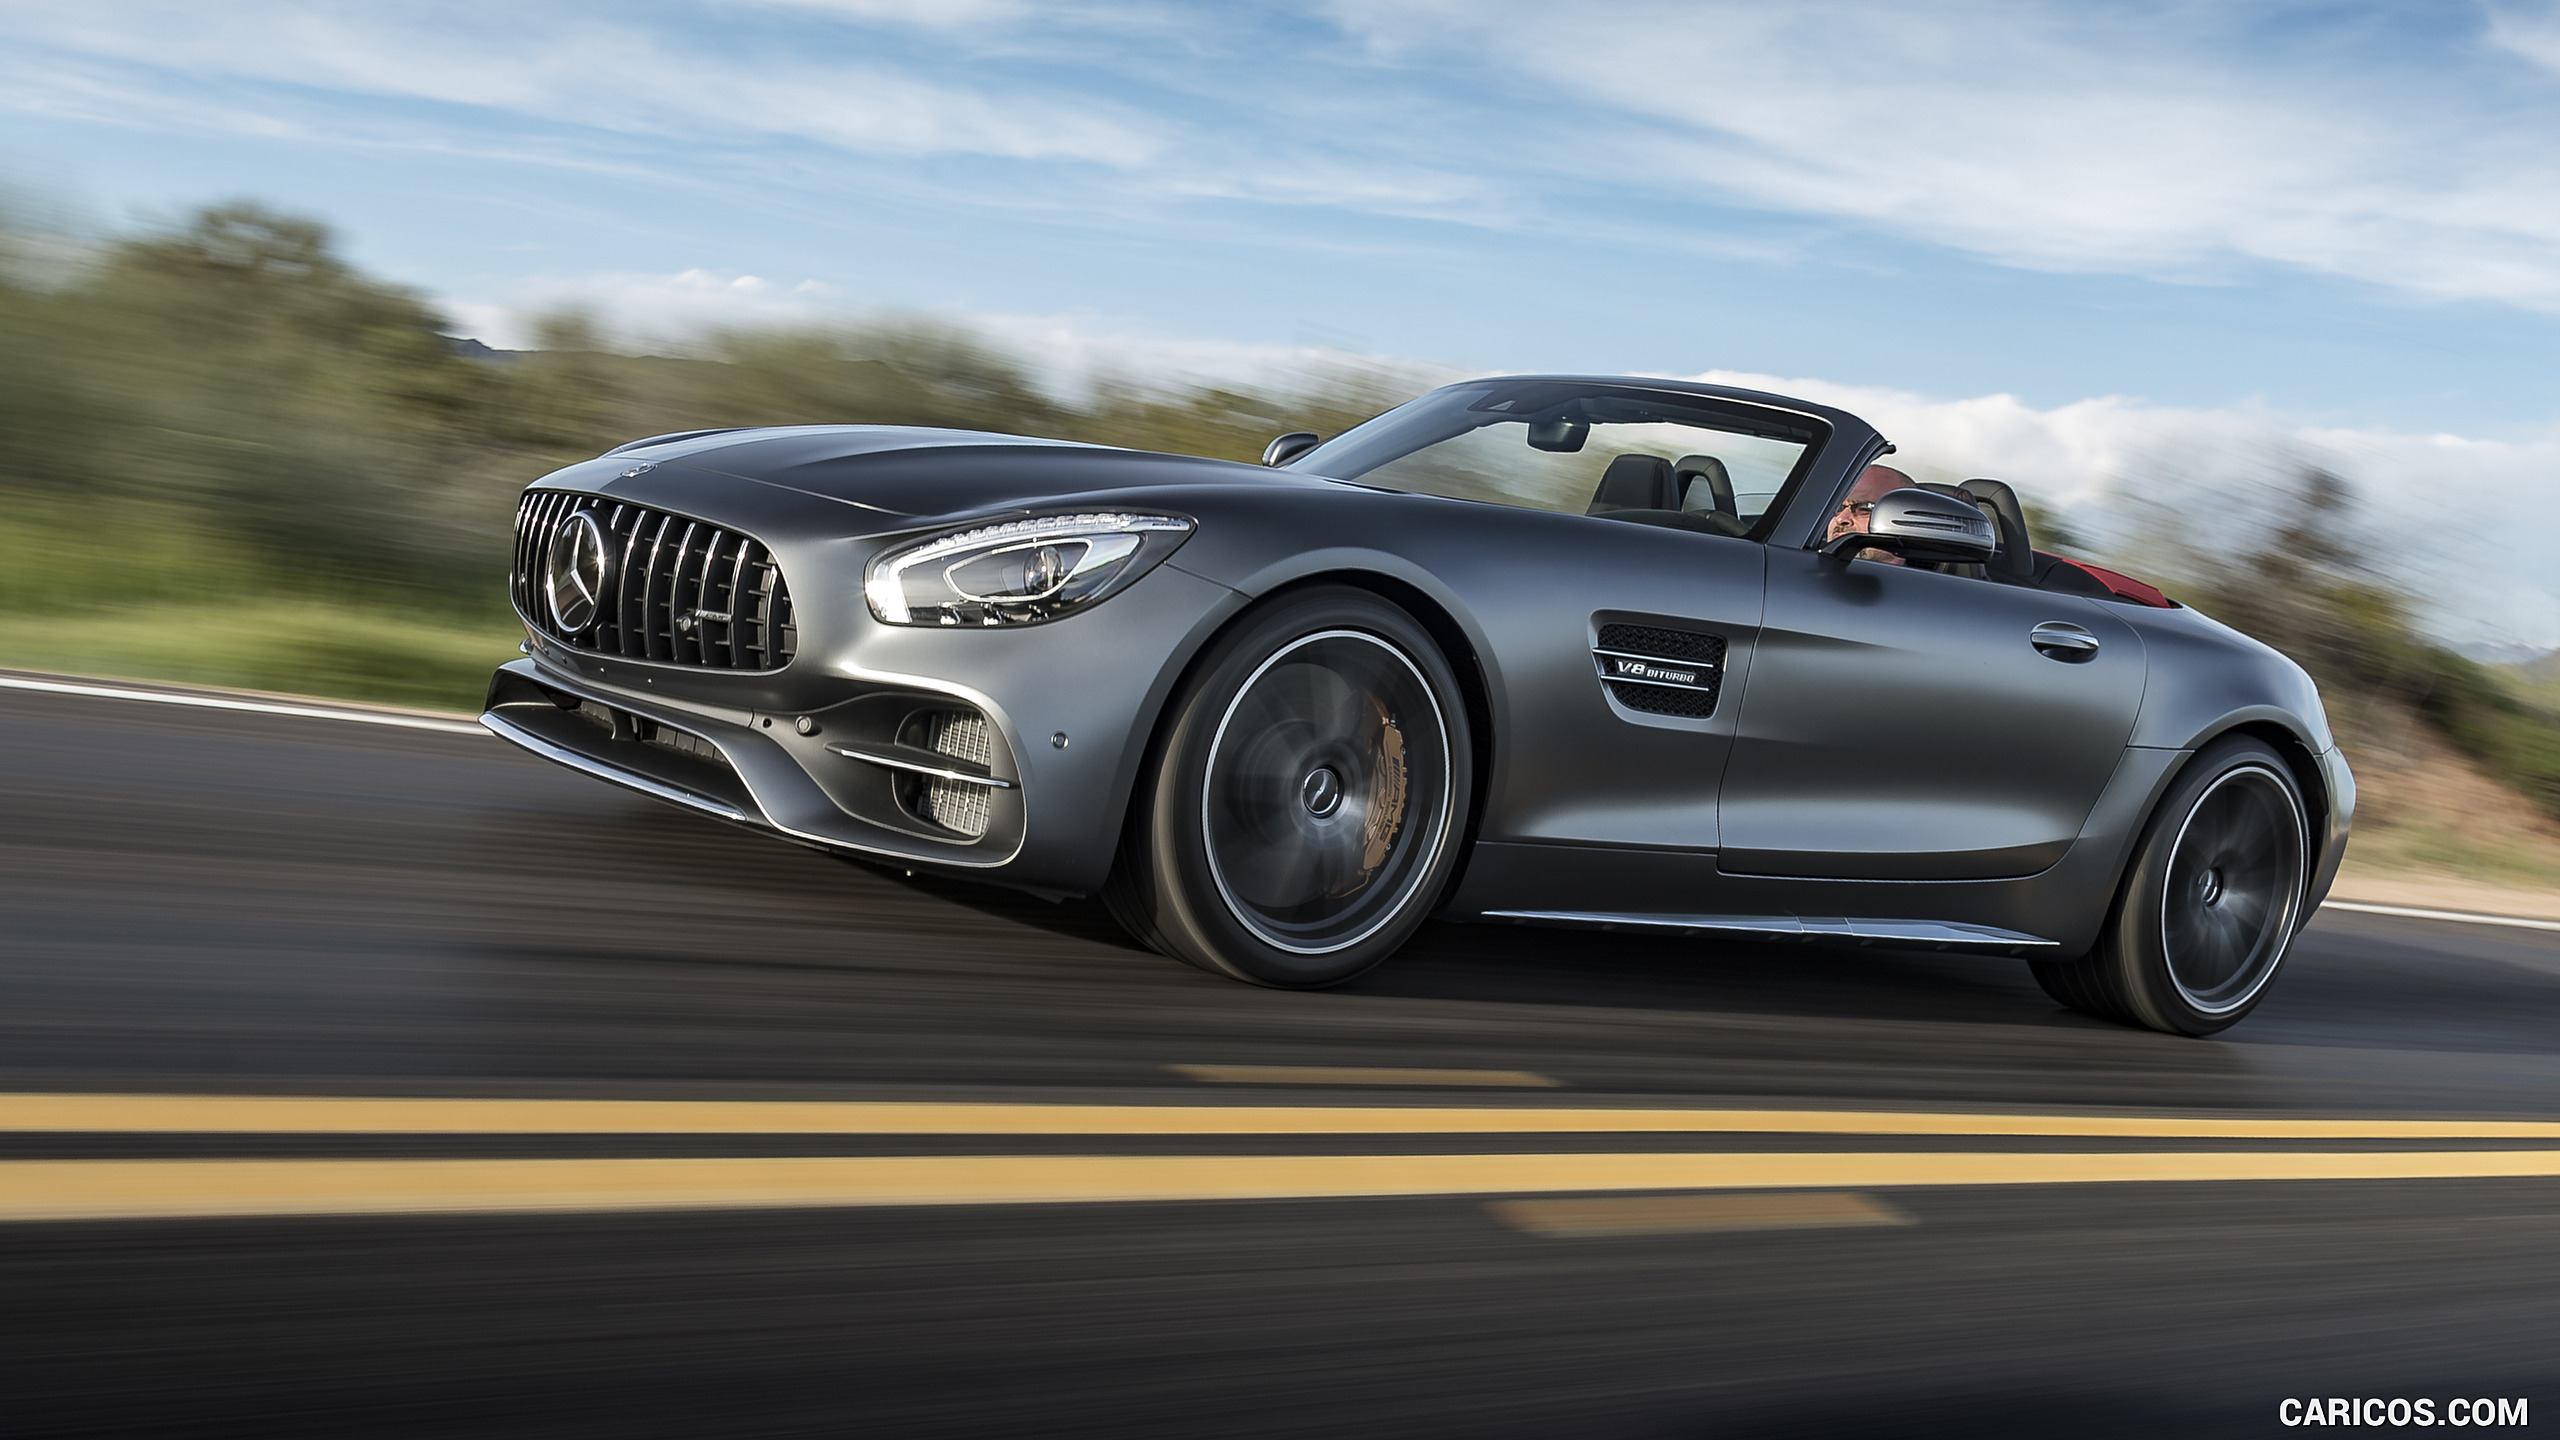 2018 Mercedes-AMG GT C Roadster - Front Three-Quarter, #294 of 350